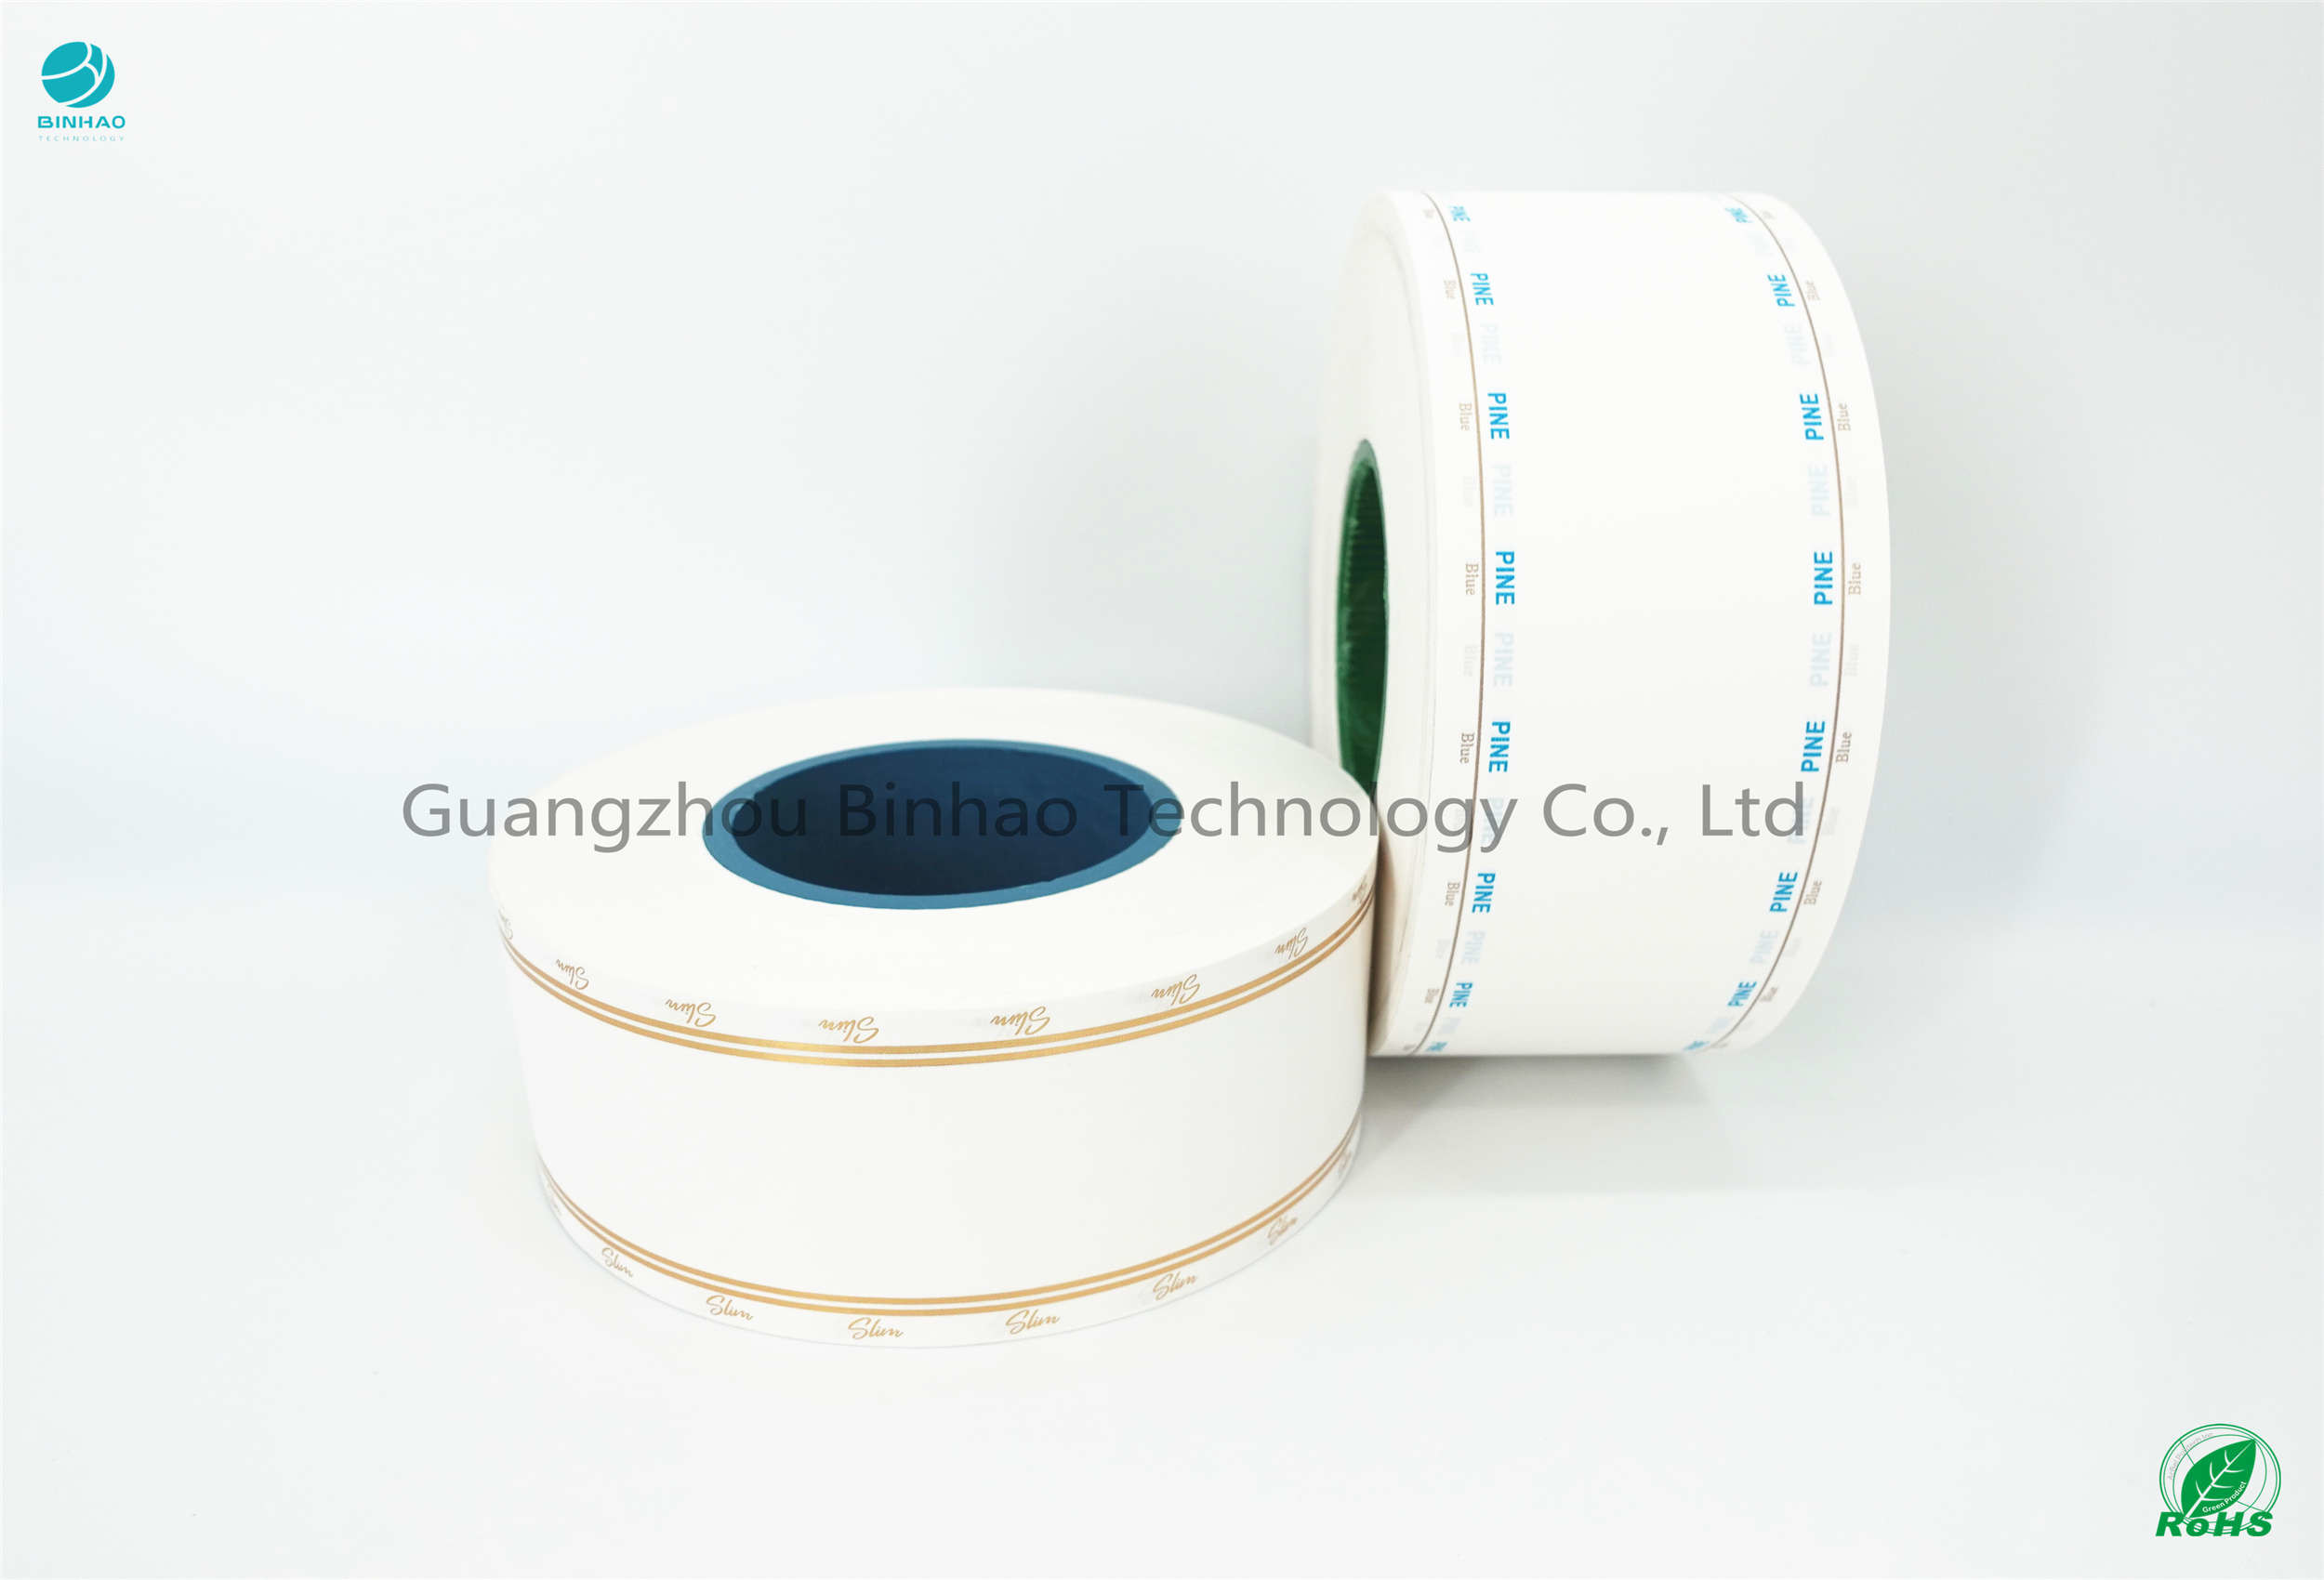 66mm ID Tobacco Filter Paper Cigarette Package Gravure Printing Plain White Paper Type